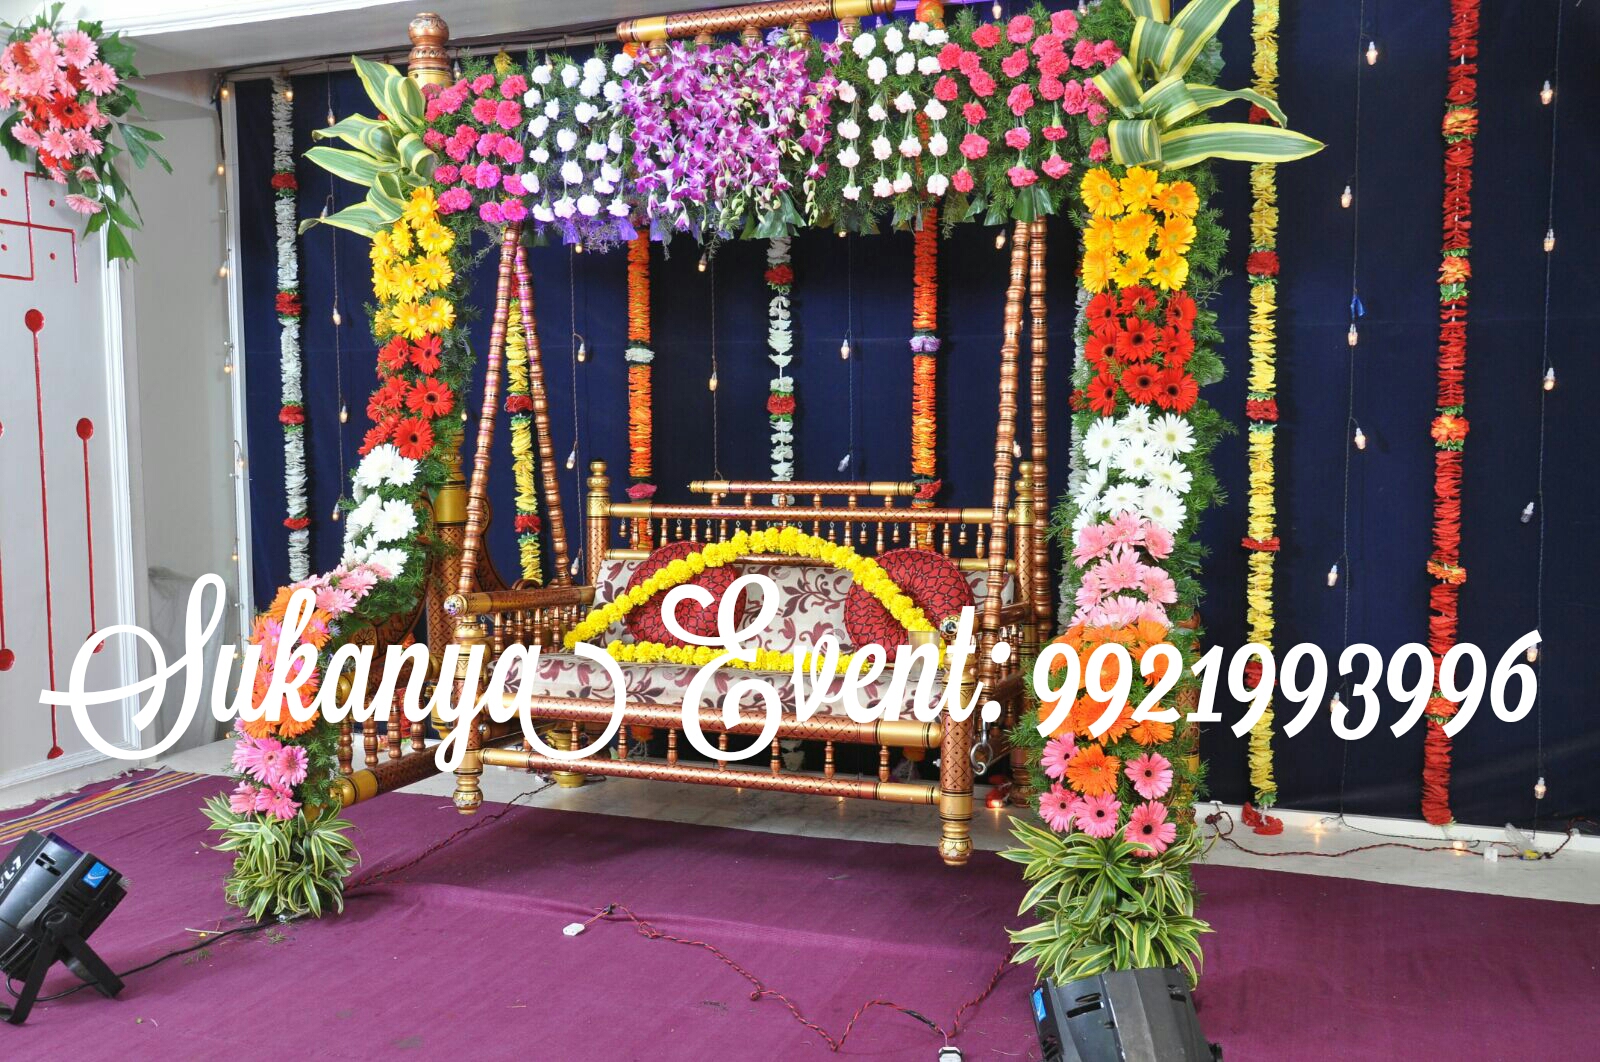  Dohale  Jevan  Best Decoration  From Sukanya Event Dohale  